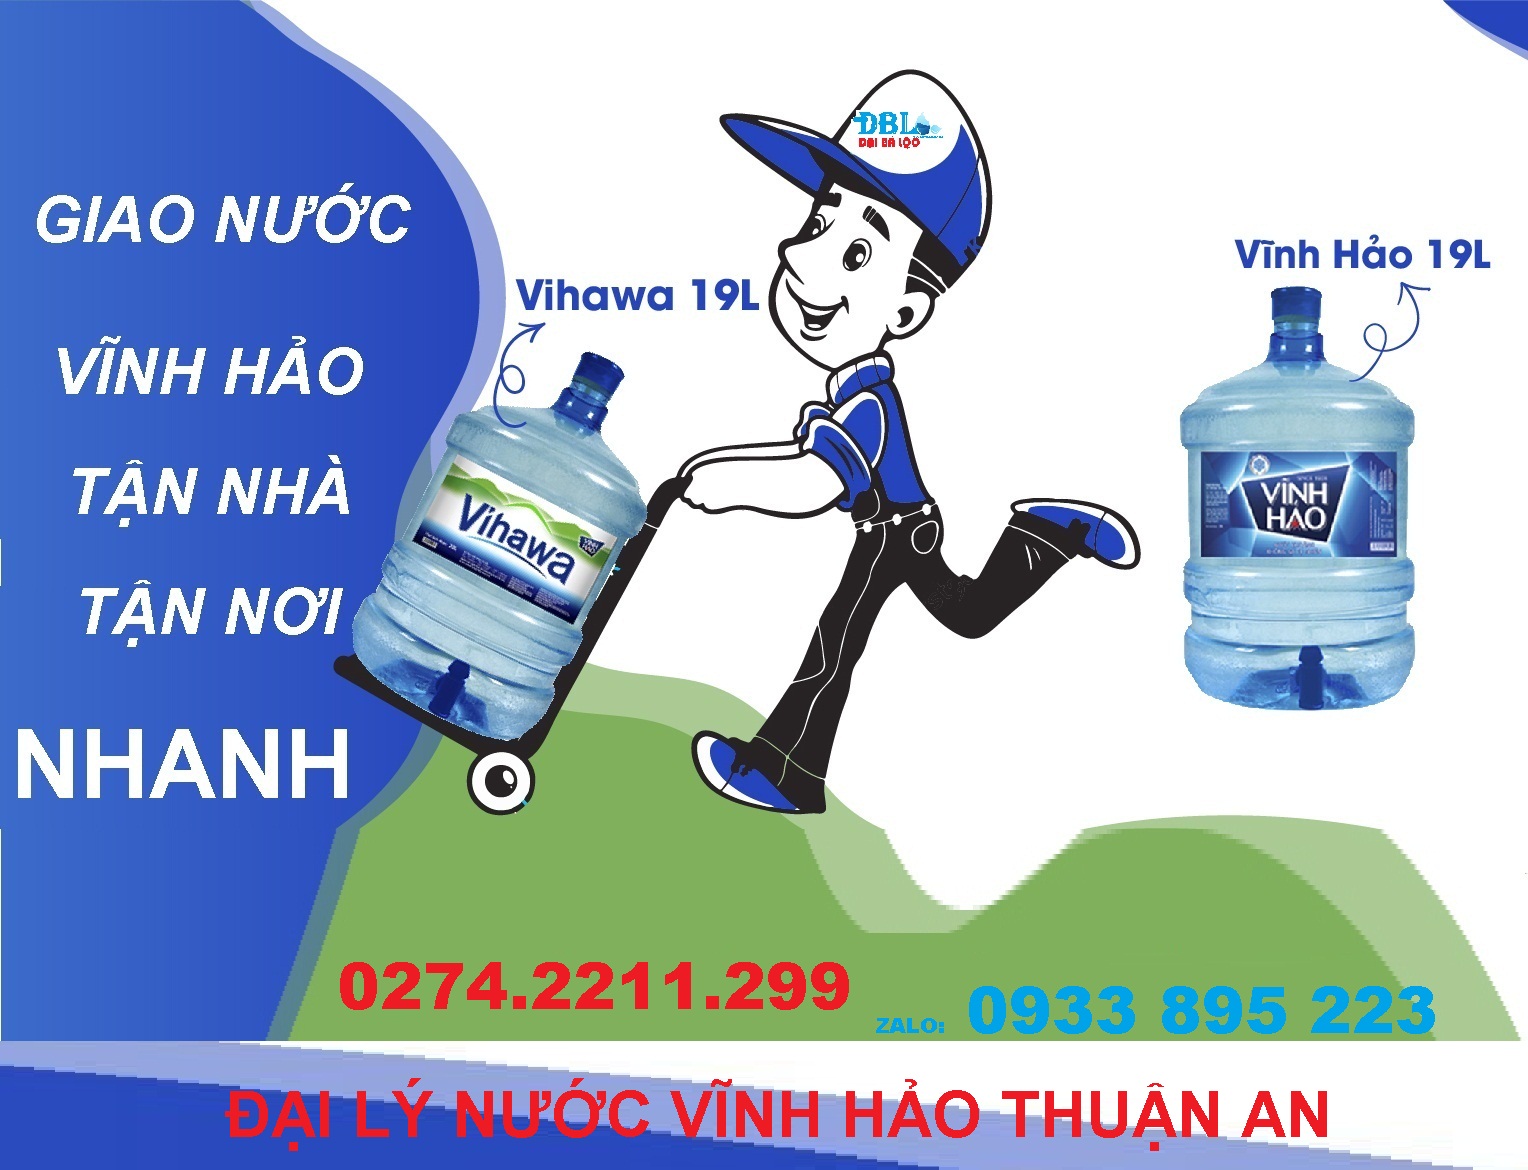 dai ly nuoc vinh hao thuan an